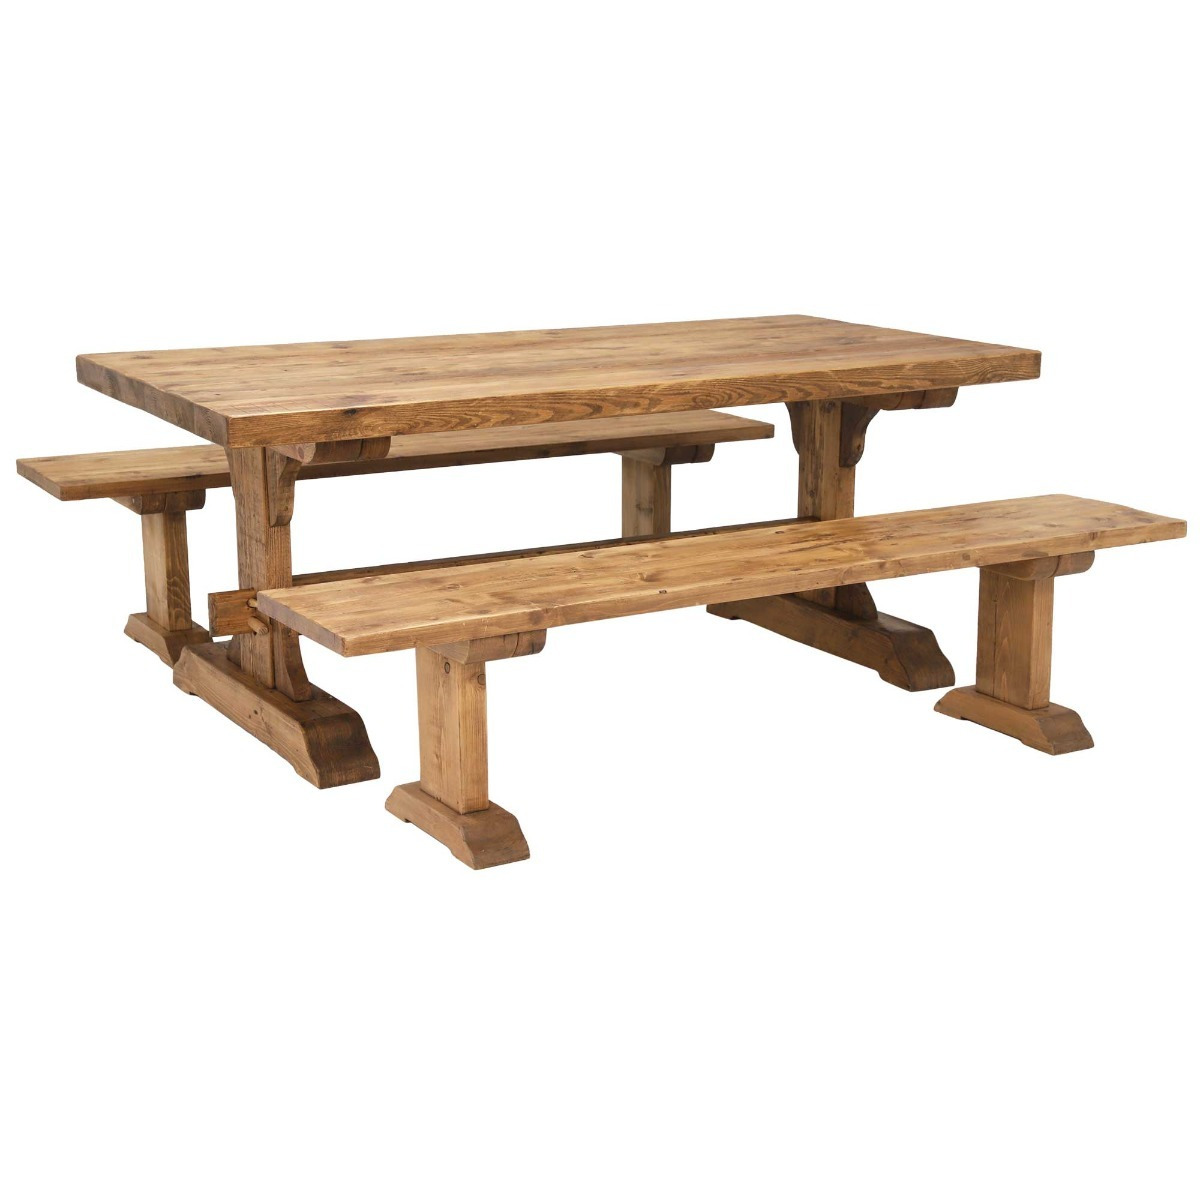 Covington Dining Table & 2 Benches, Brown - Barker & Stonehouse - image 1